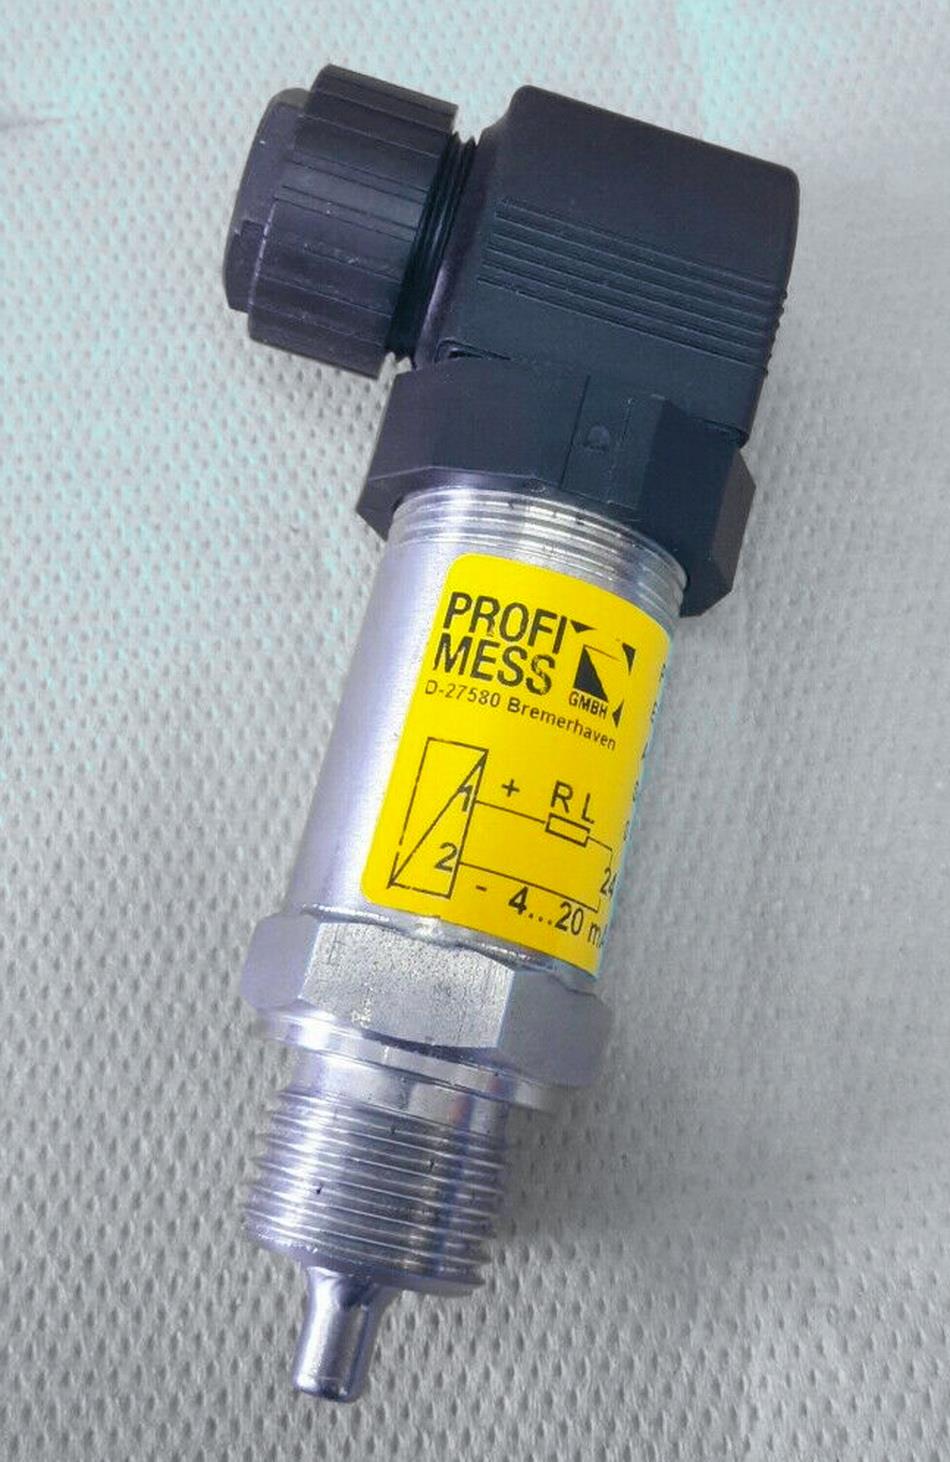 Profimess PT-01 Temp Transmitter,Temperature Control, Probe Sensor, Temperature Transmtter, Profimess , PT-01 , Temperature Transducer, Two-wire Transmitter,Profimess,Instruments and Controls/Thermometers